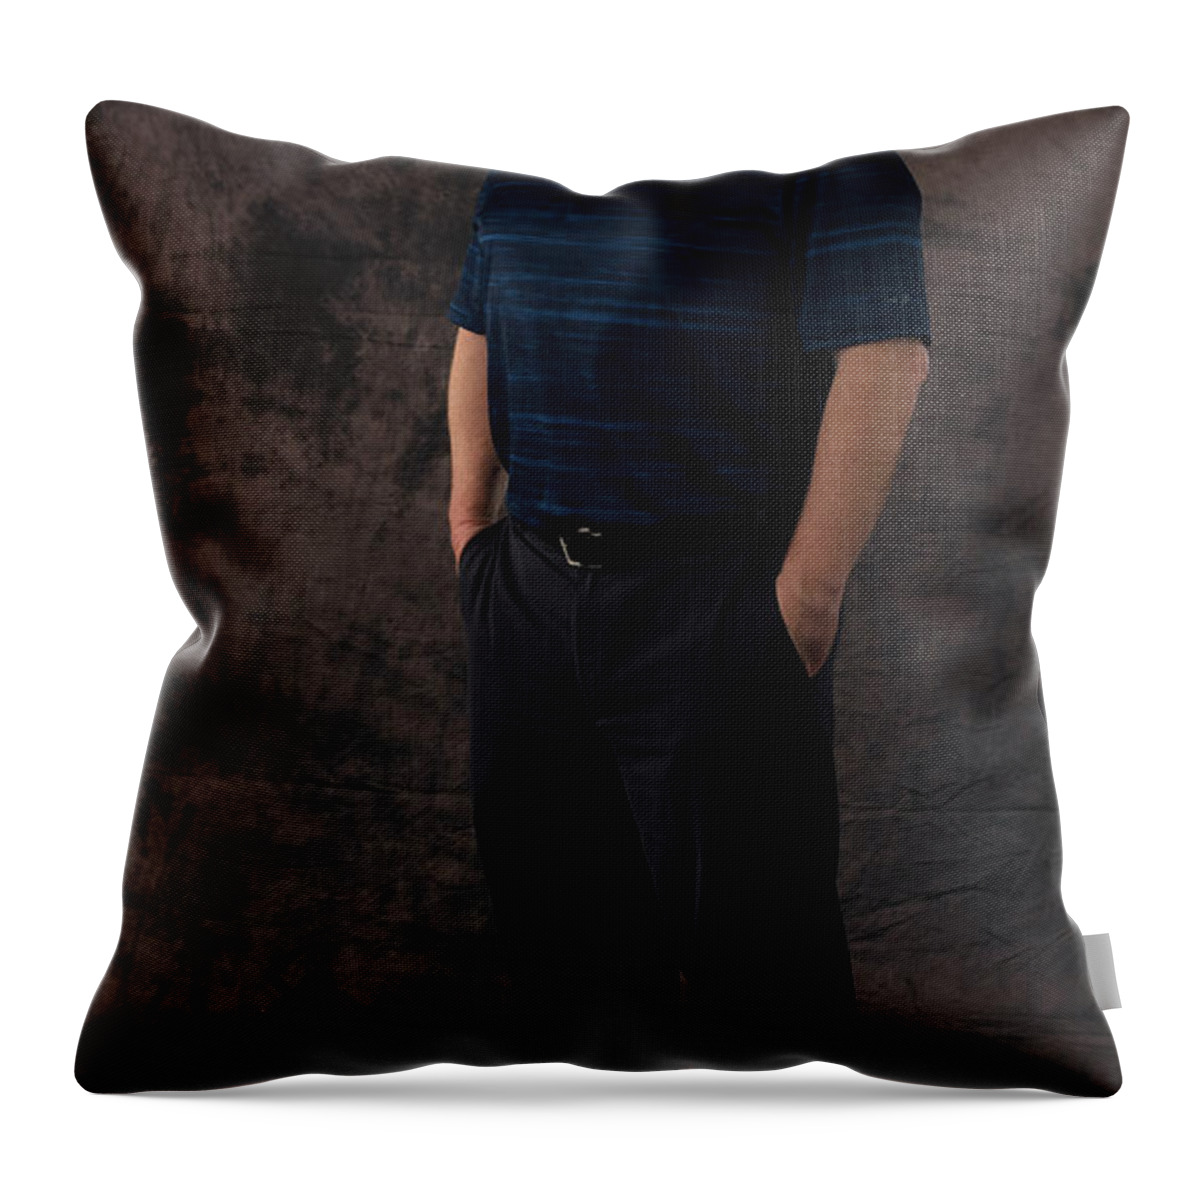 Tina Richard Throw Pillow featuring the photograph Scott by Gregory Daley MPSA